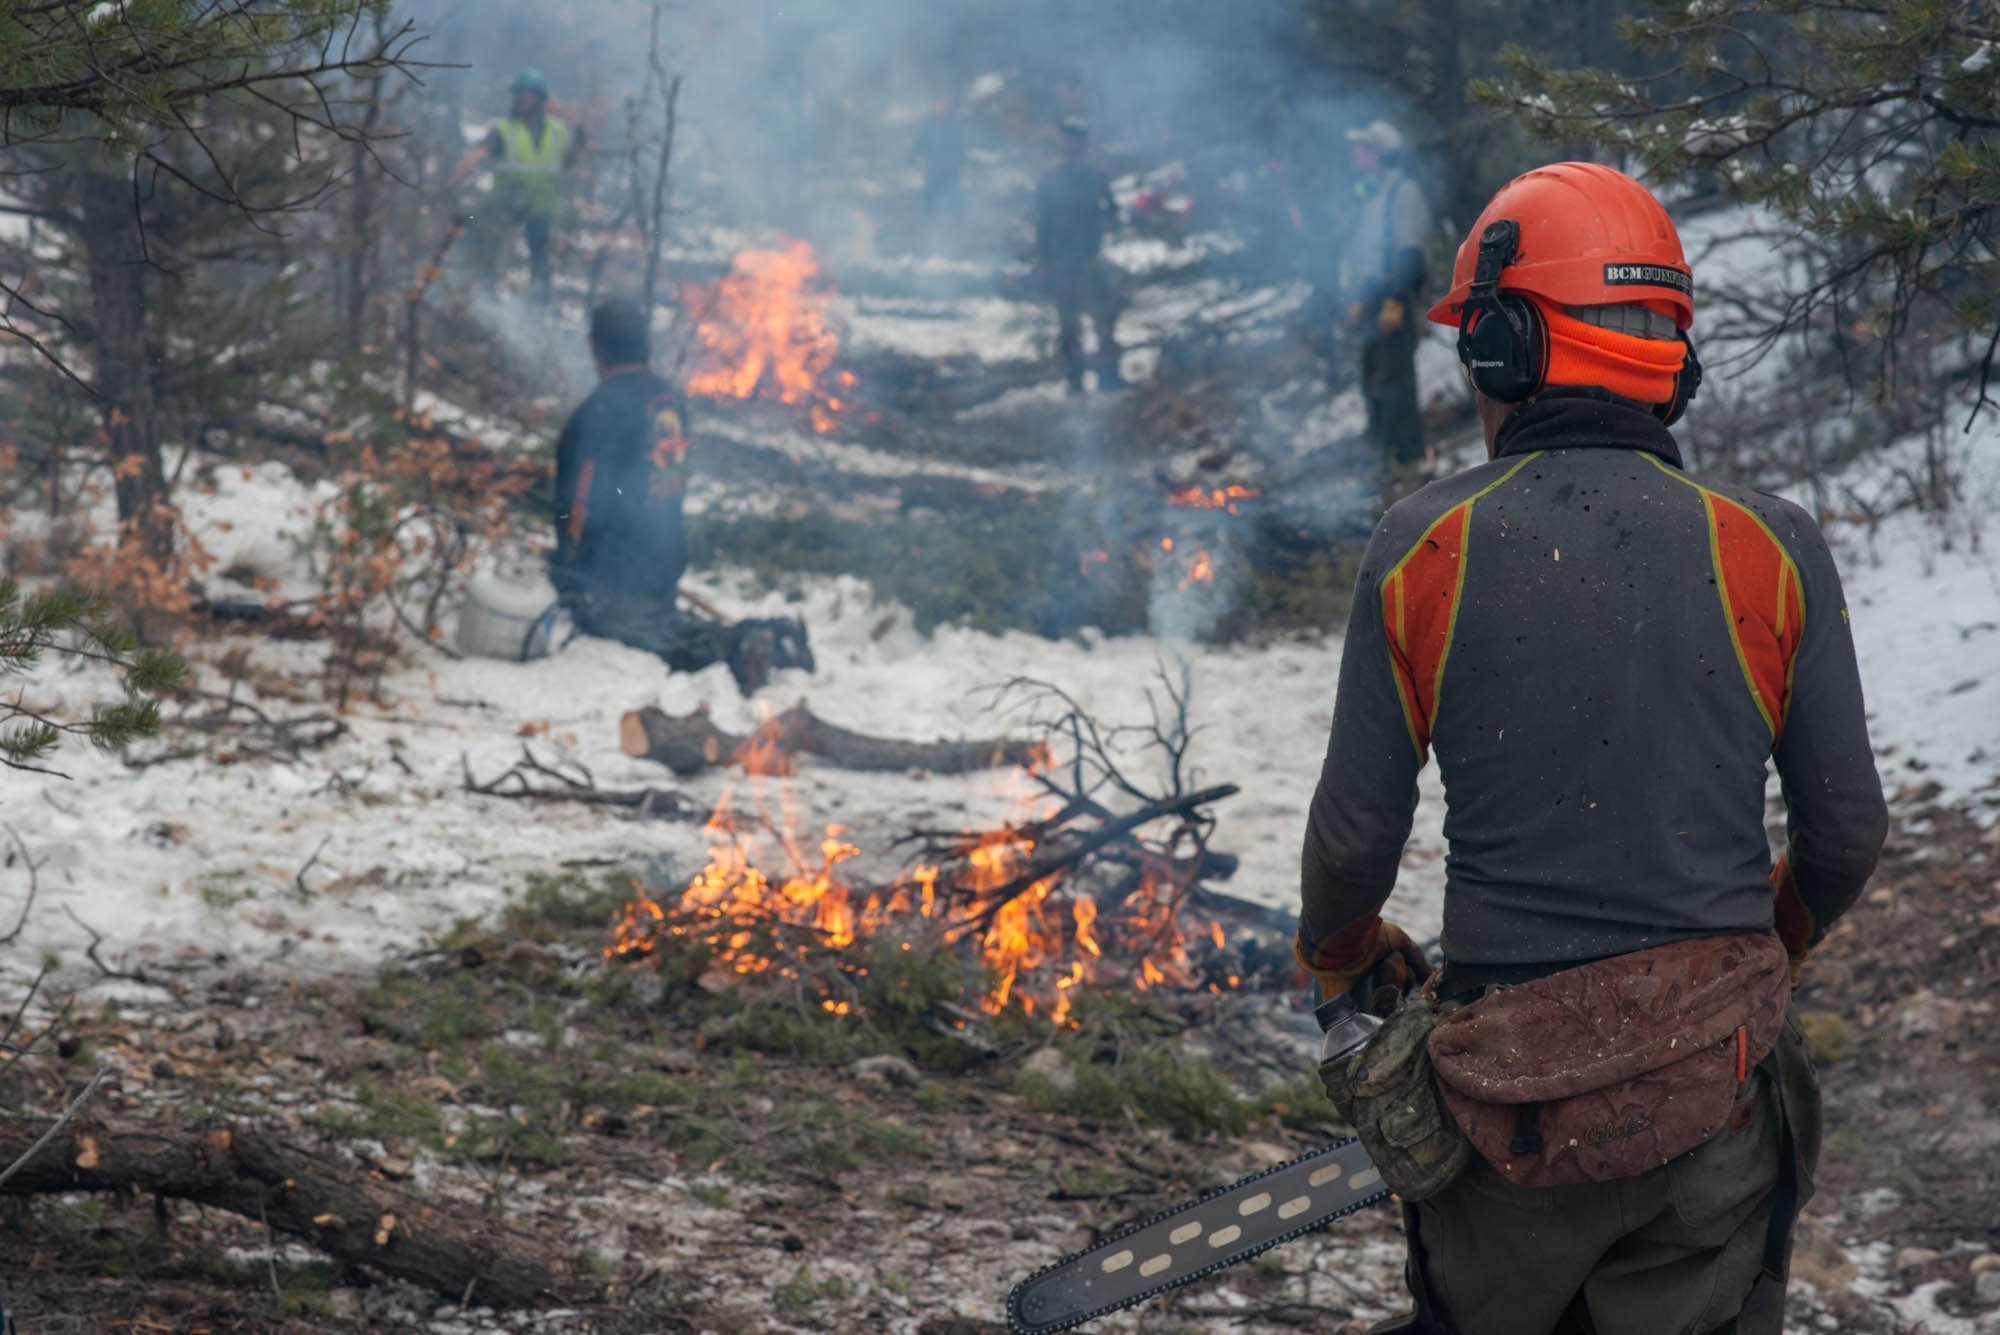   Controlled fires burn in late winter during a thinning mitigation effort to create defensible space. Forester Johnny De’Scoville surveys the scene in the foreground with chainsaw in hand.  